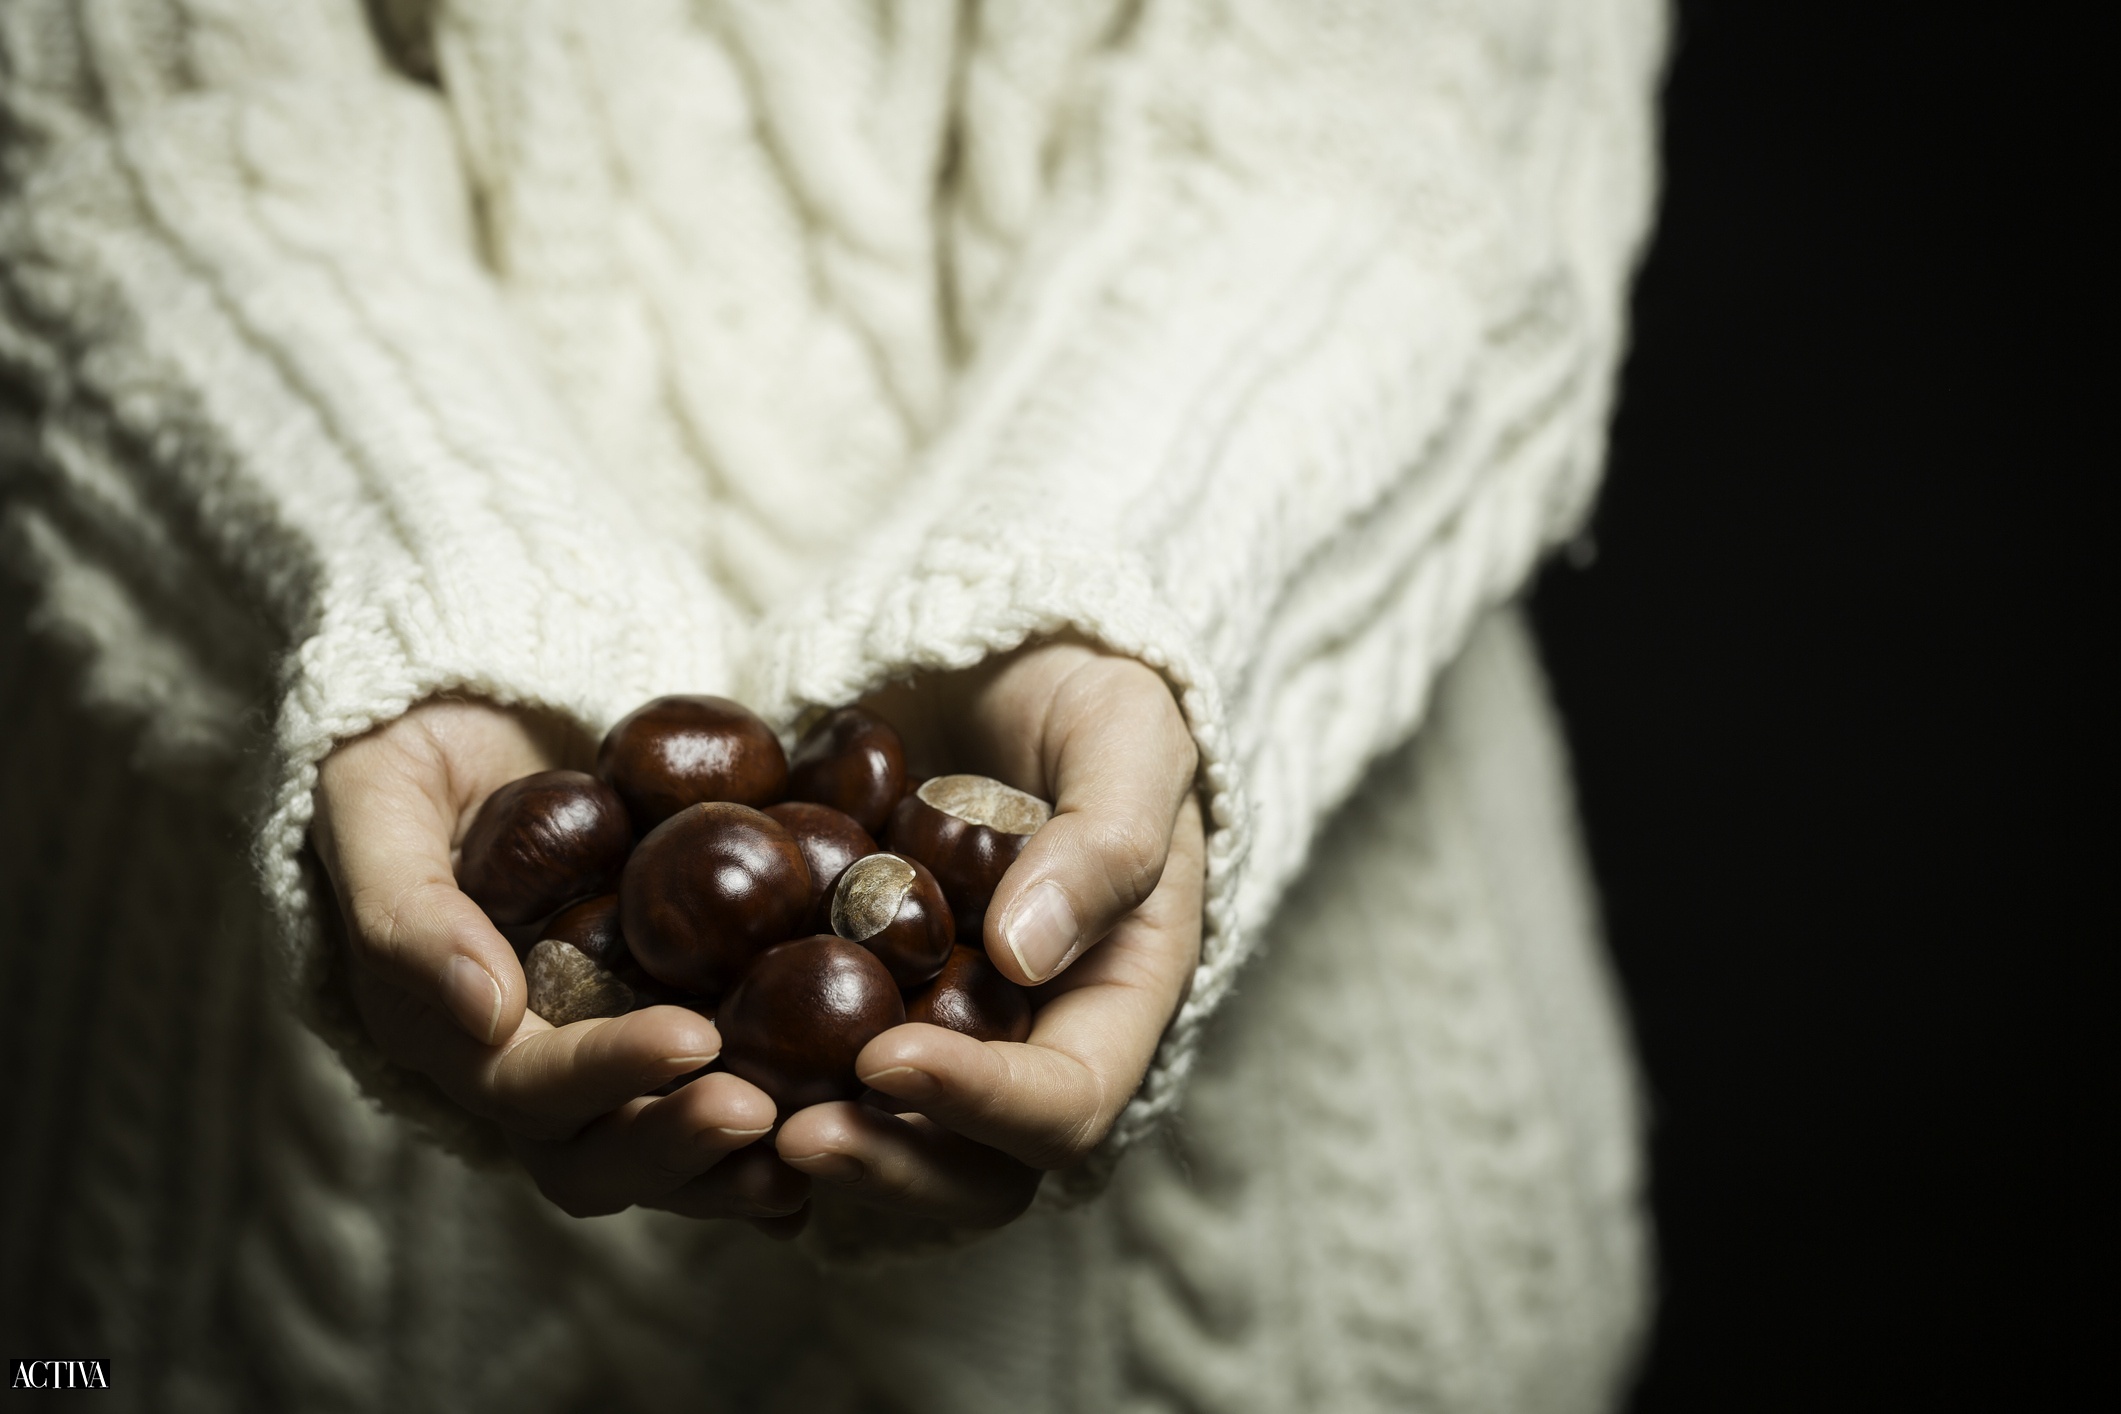 Filipa Gomes' foolproof trick for the perfect roasted chestnuts